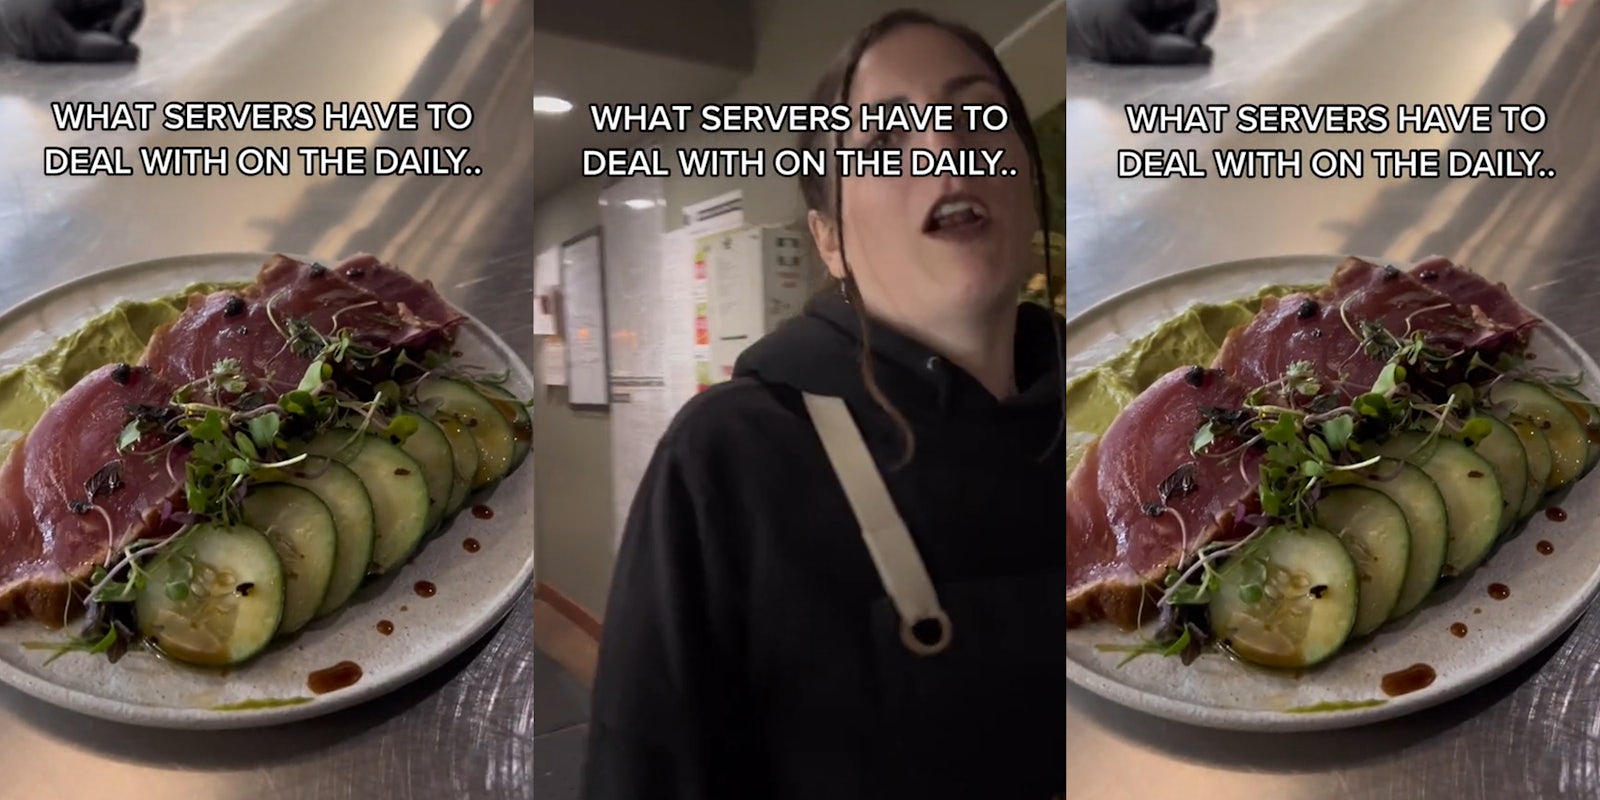 dish that customer ordered crudo caption 'WHAT SERVERS HAVE TO DEAL WITH ON THE DAILY..' (l) server in kitchen speaking caption 'WHAT SERVERS HAVE TO DEAL WITH ON THE DAILY..' (c) dish that customer ordered crudo caption 'WHAT SERVERS HAVE TO DEAL WITH ON THE DAILY..' (r)